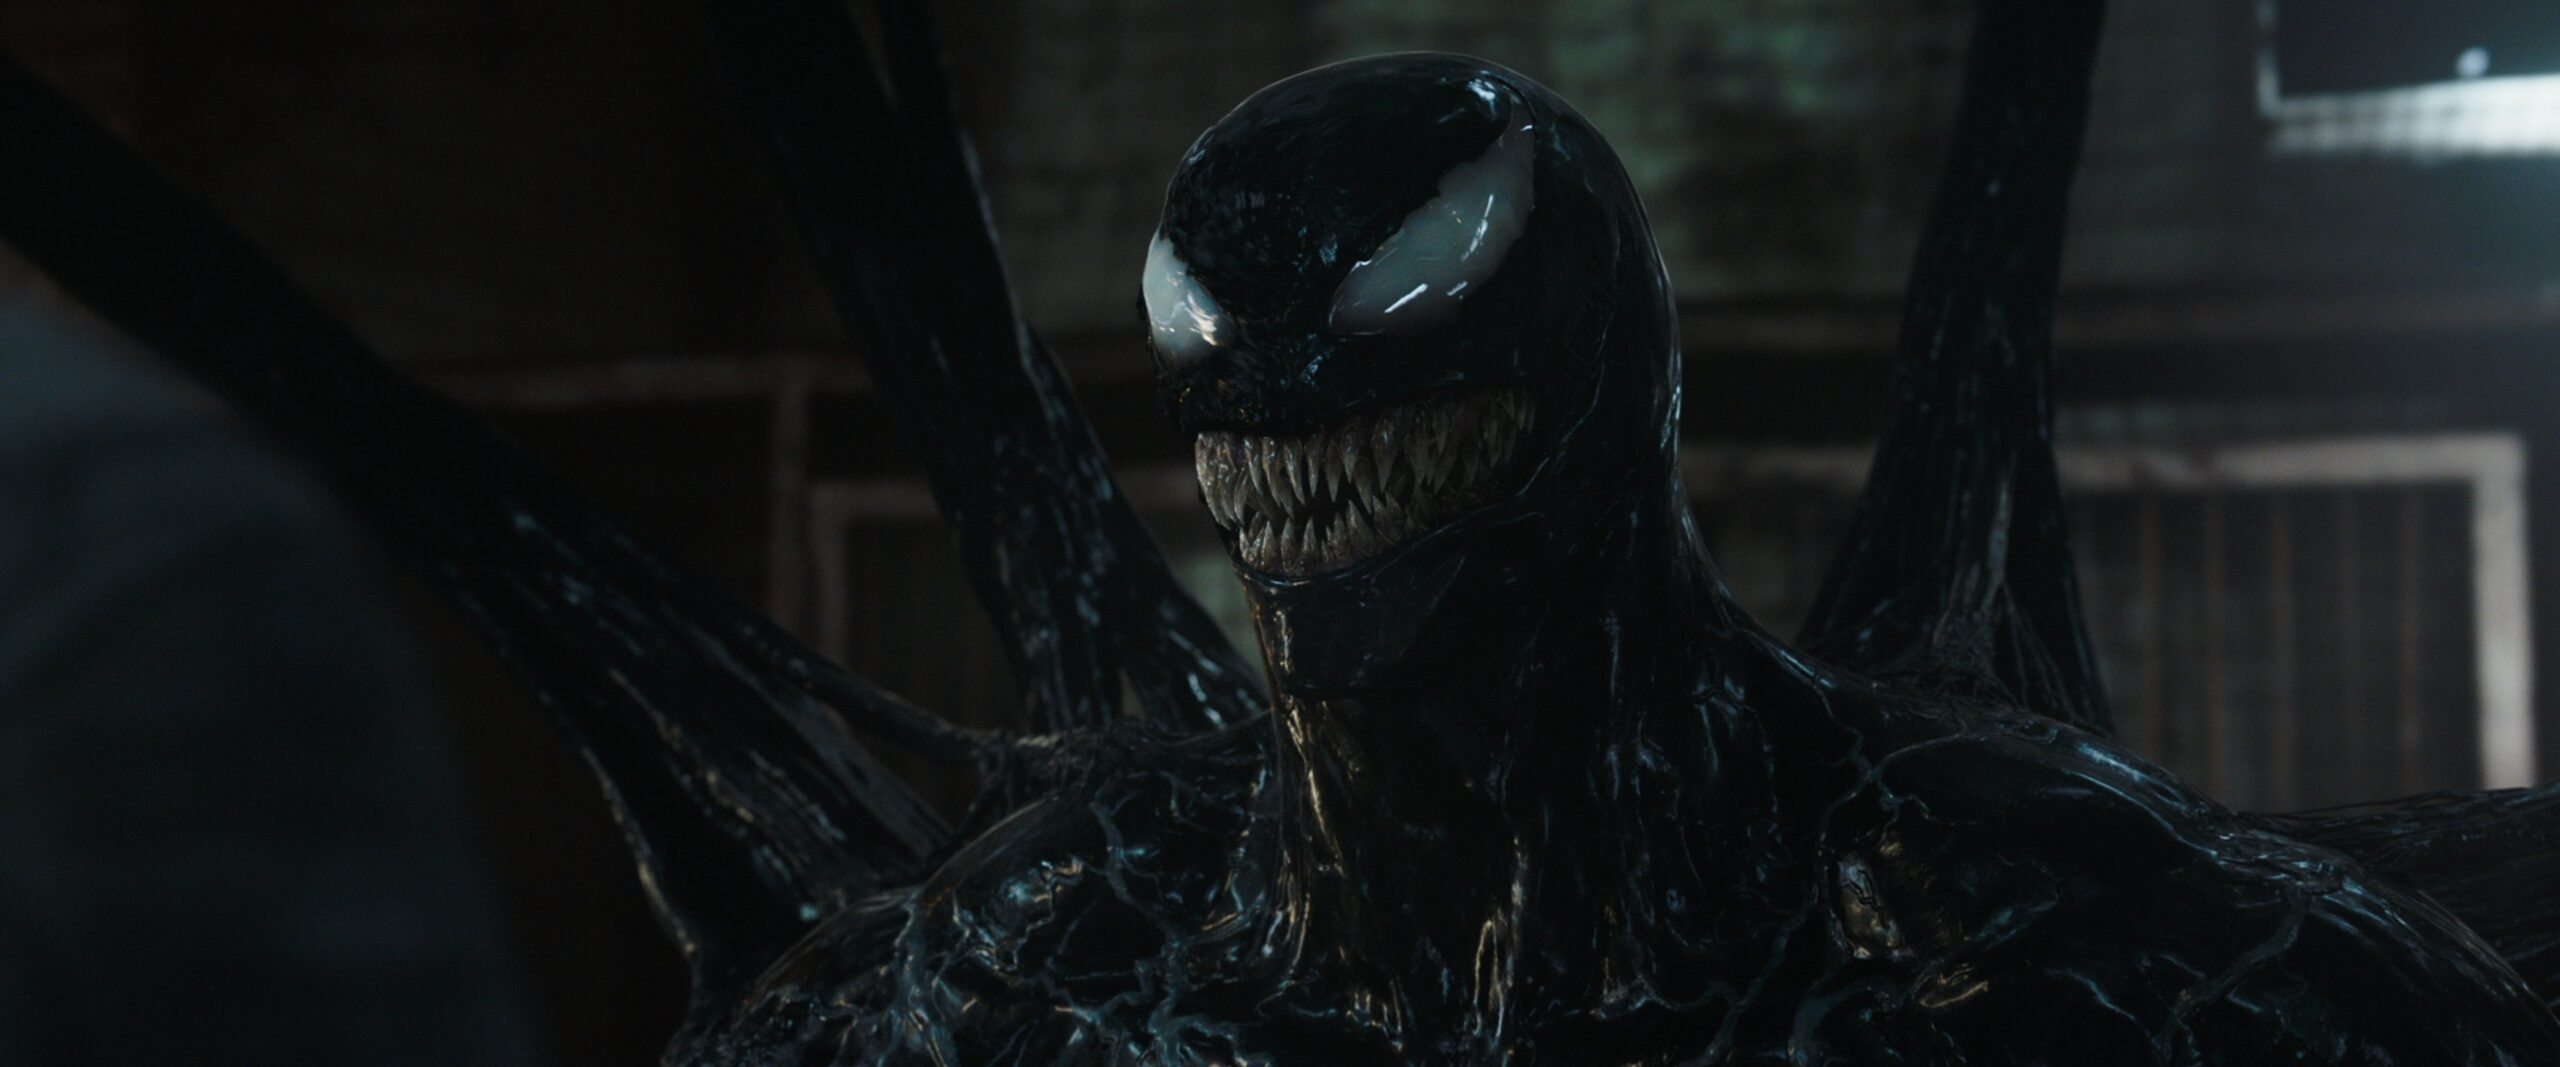 'Venom: The Last Dance' To Be Longest Film In Sony Spider-Man Universe (Exclusive)